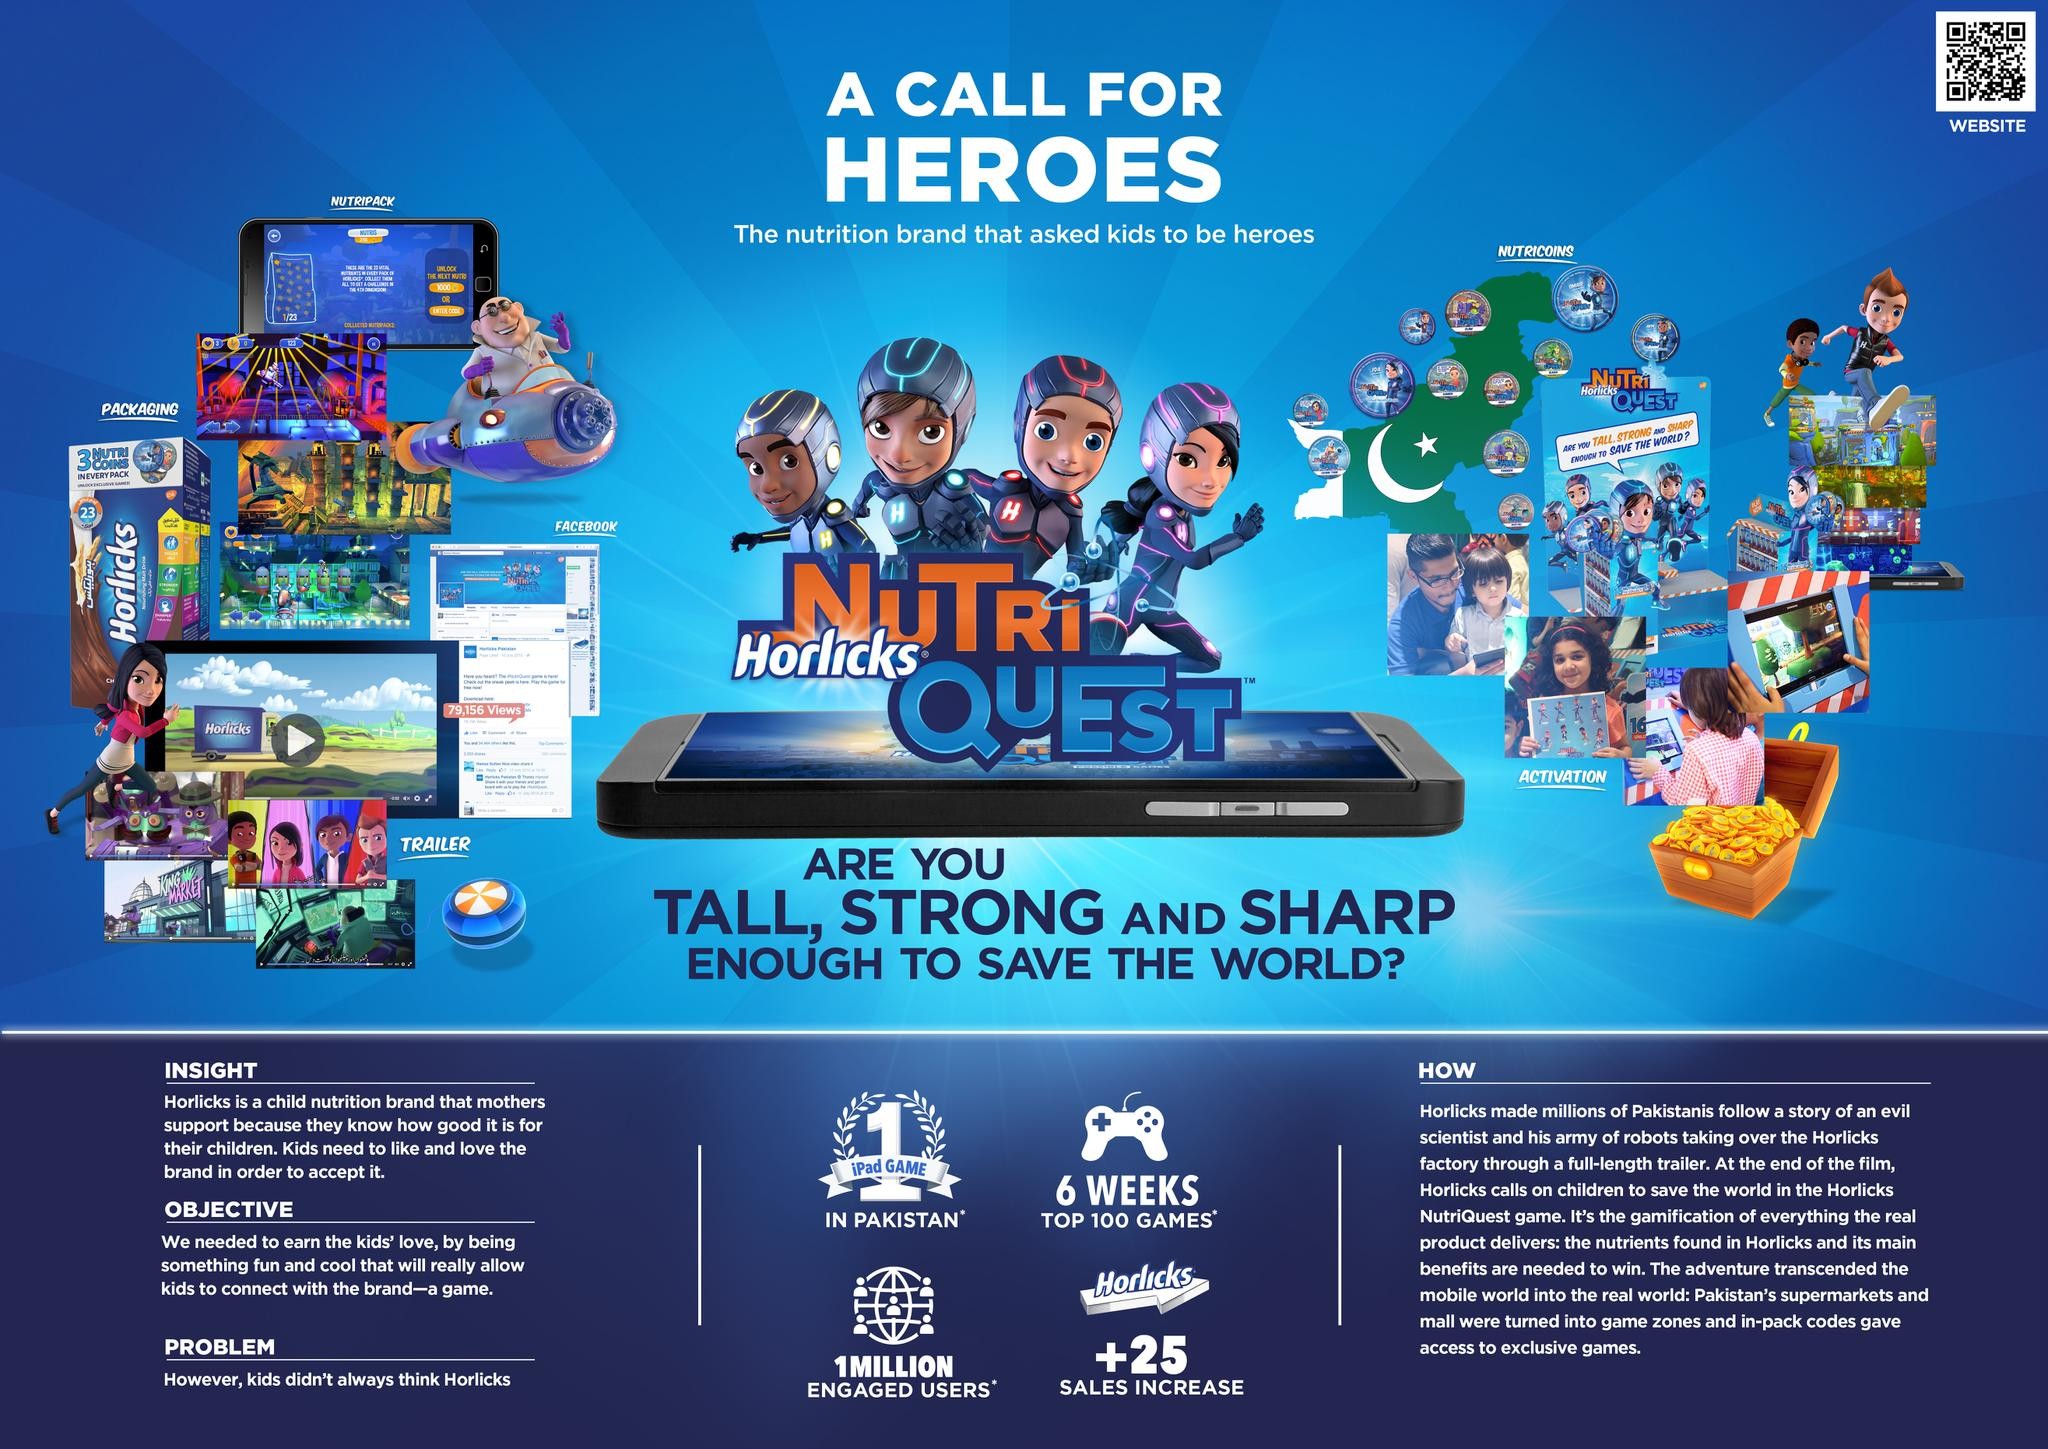 The "Horlicks NutriQuest" integrated campaign